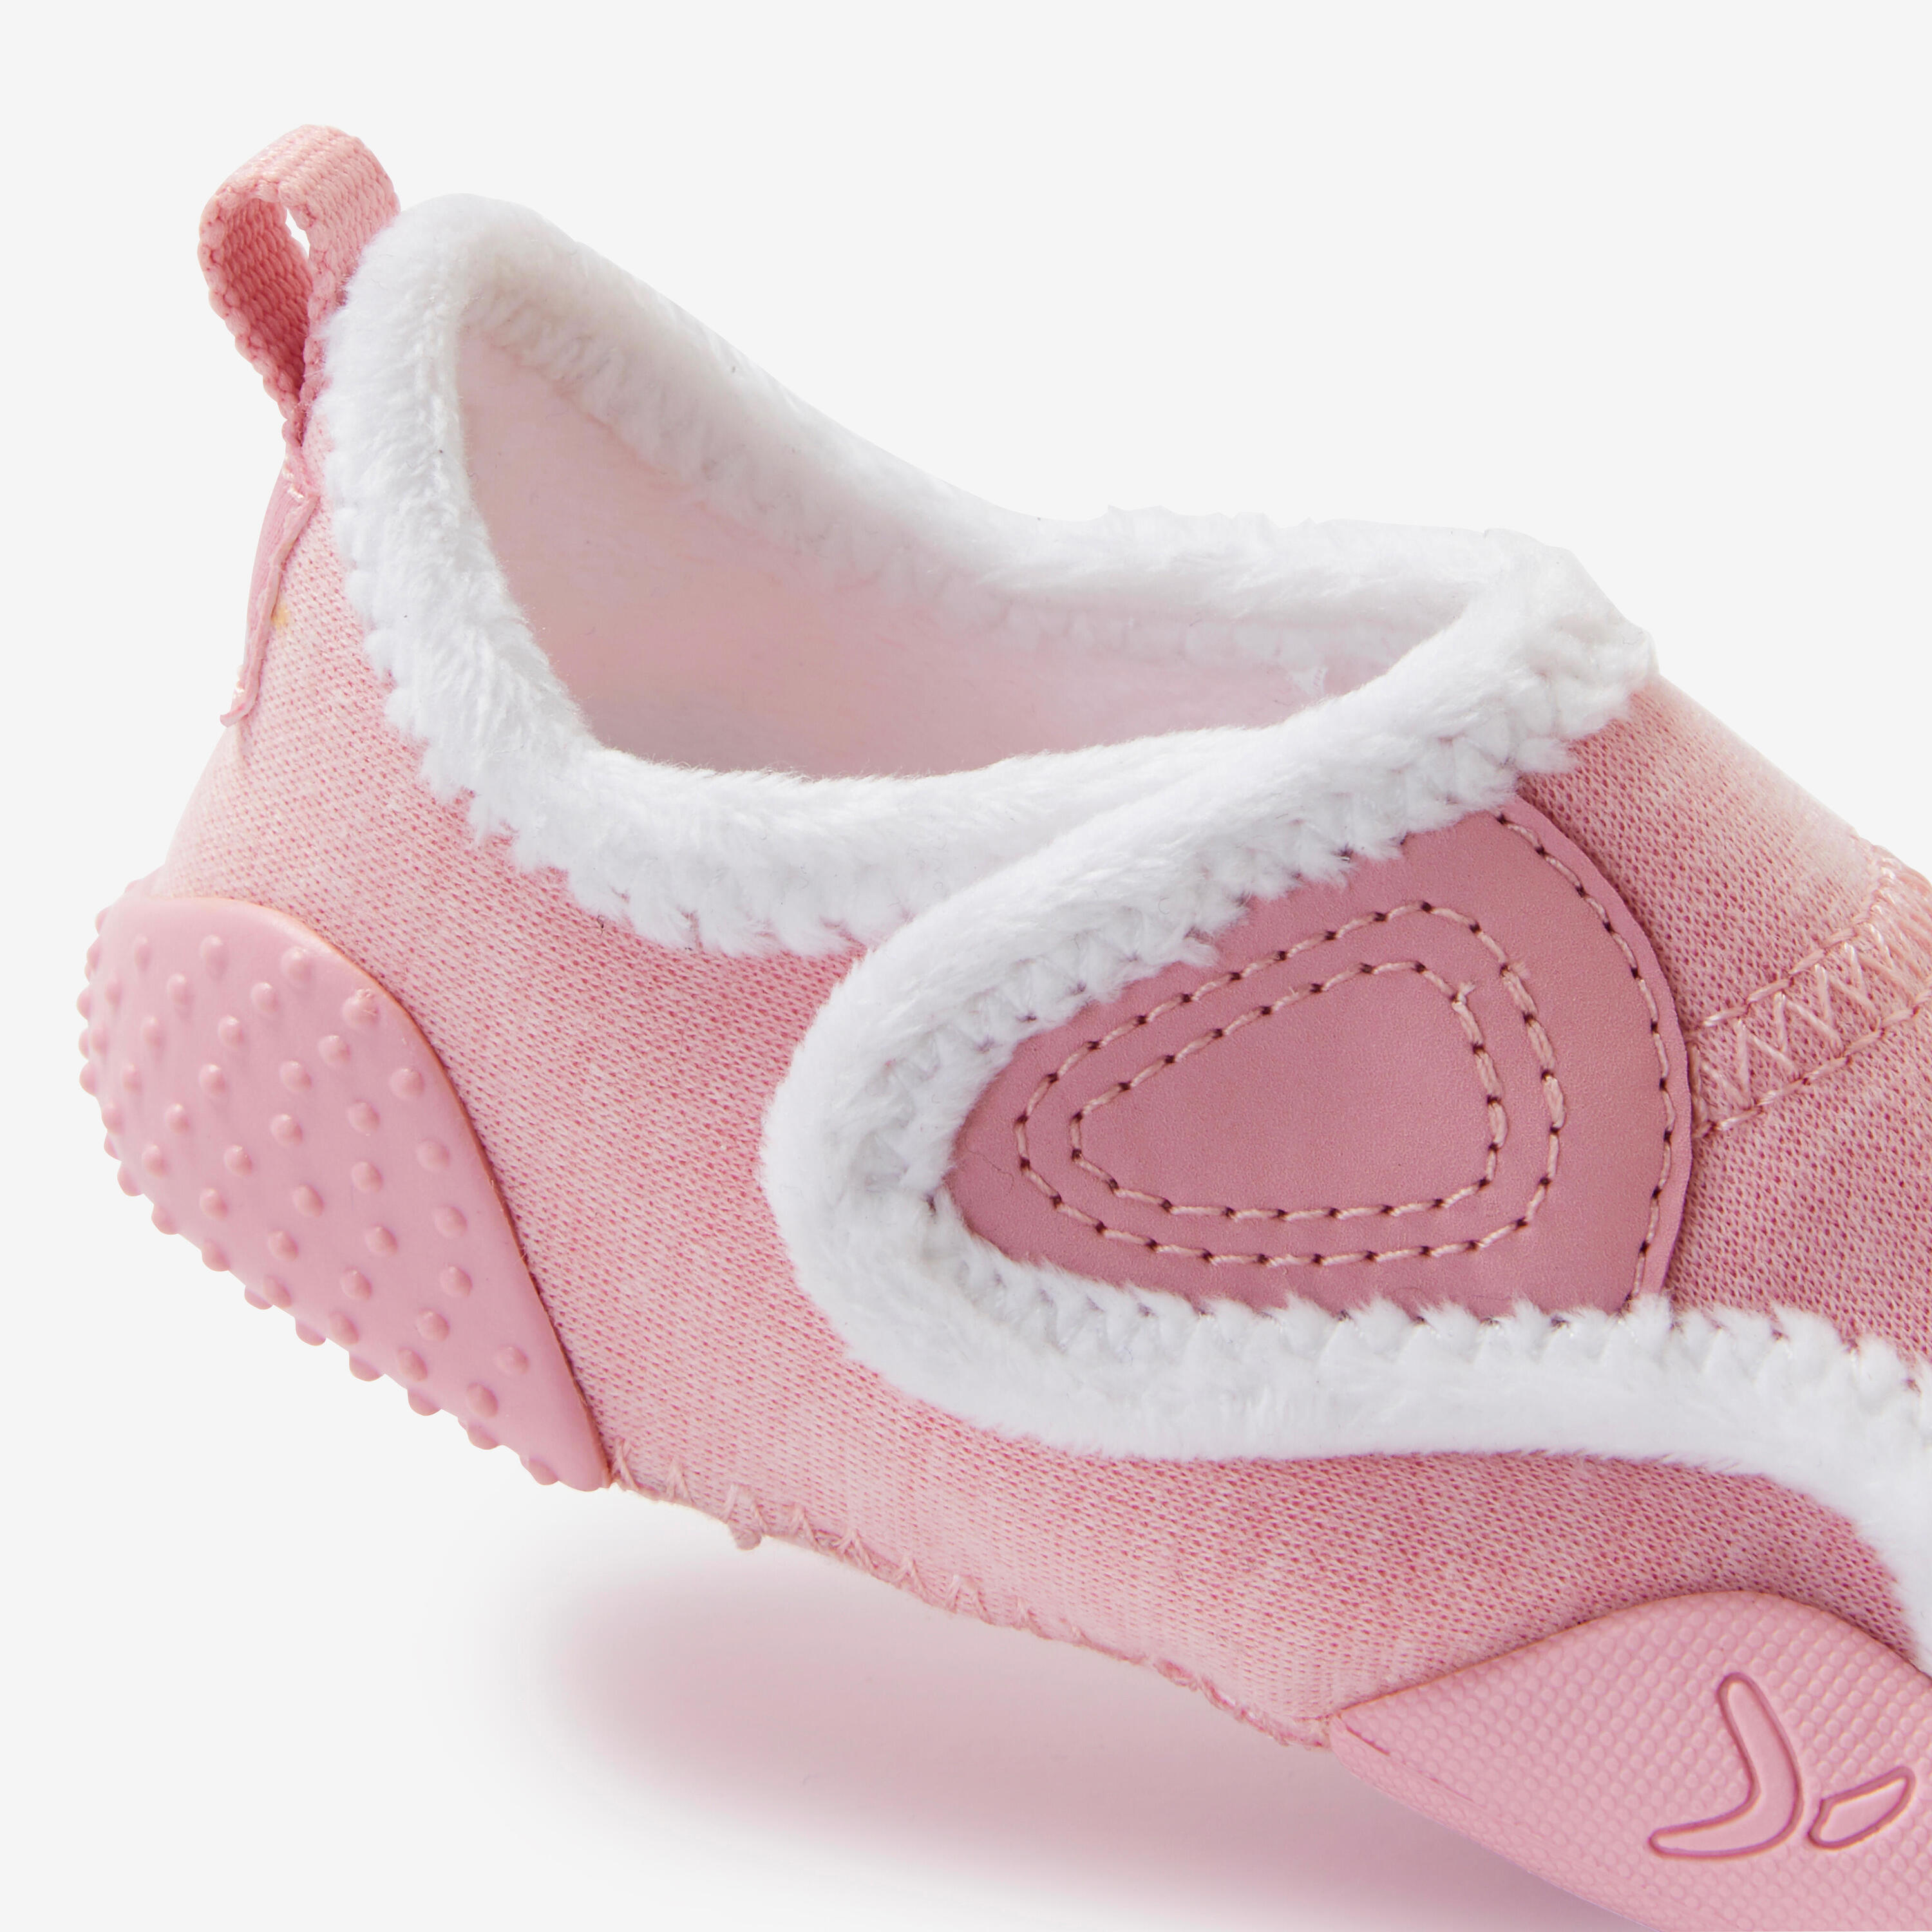 Kids' Comfortable Bootee 550 Babylight - Pink 5/7